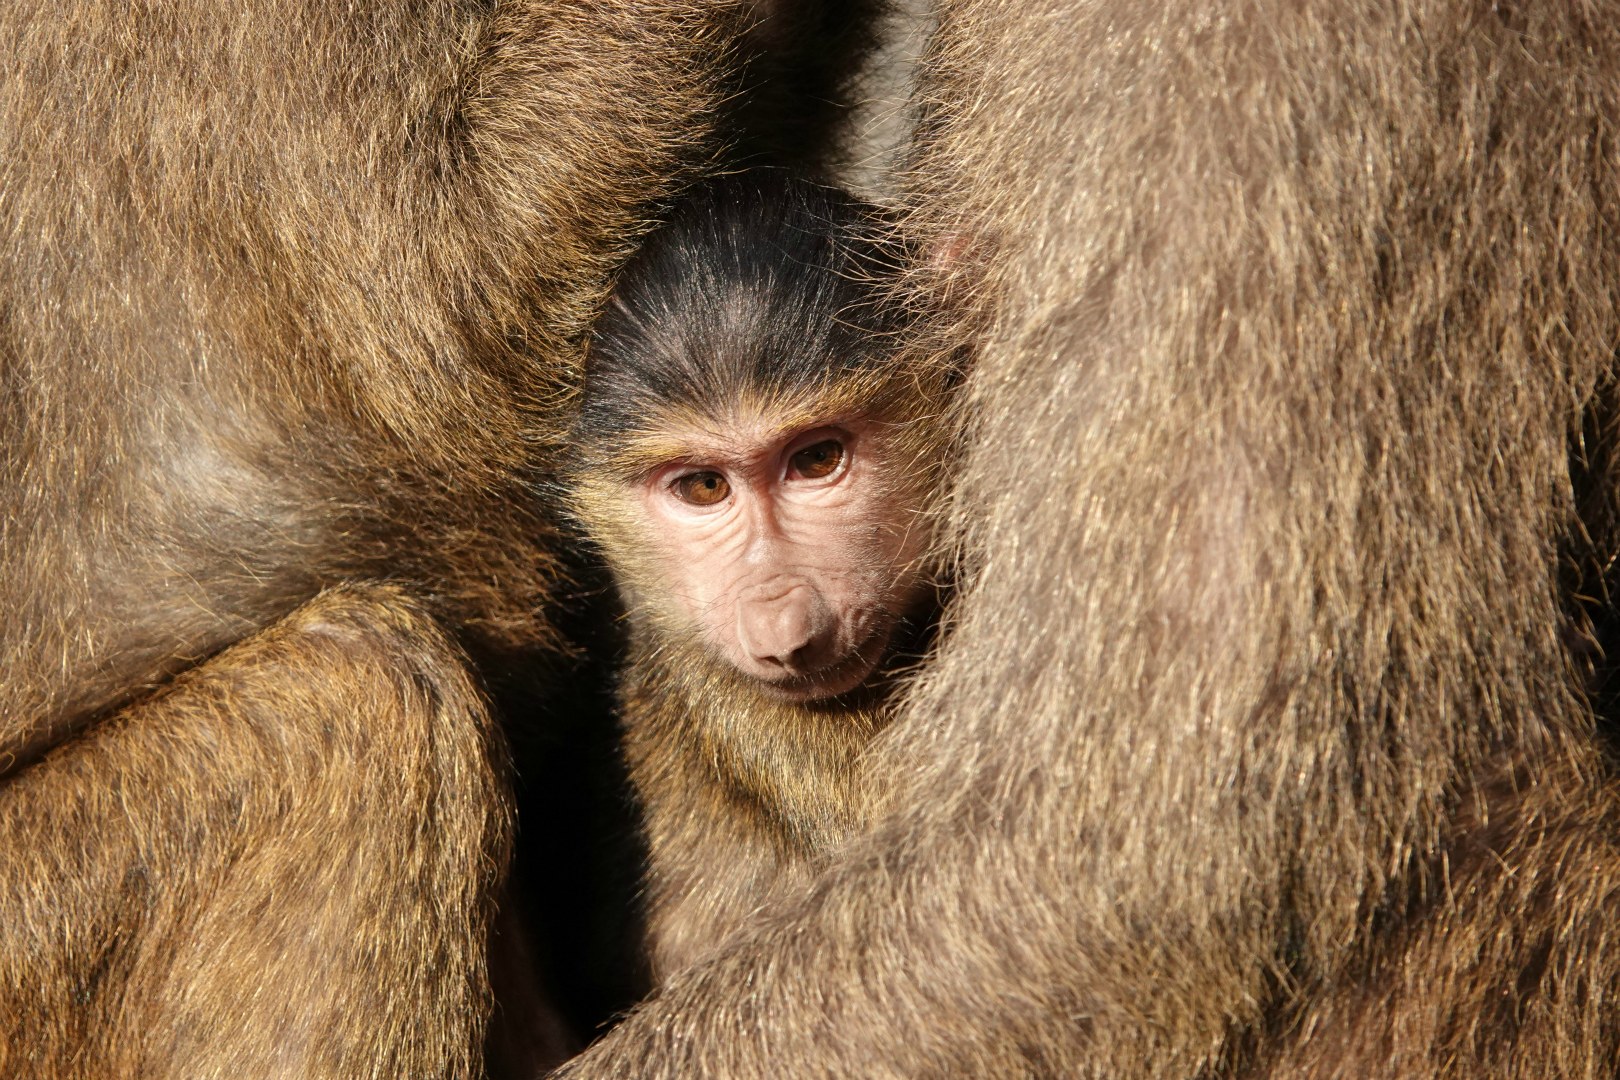 Young Baboon, Kibale National Park